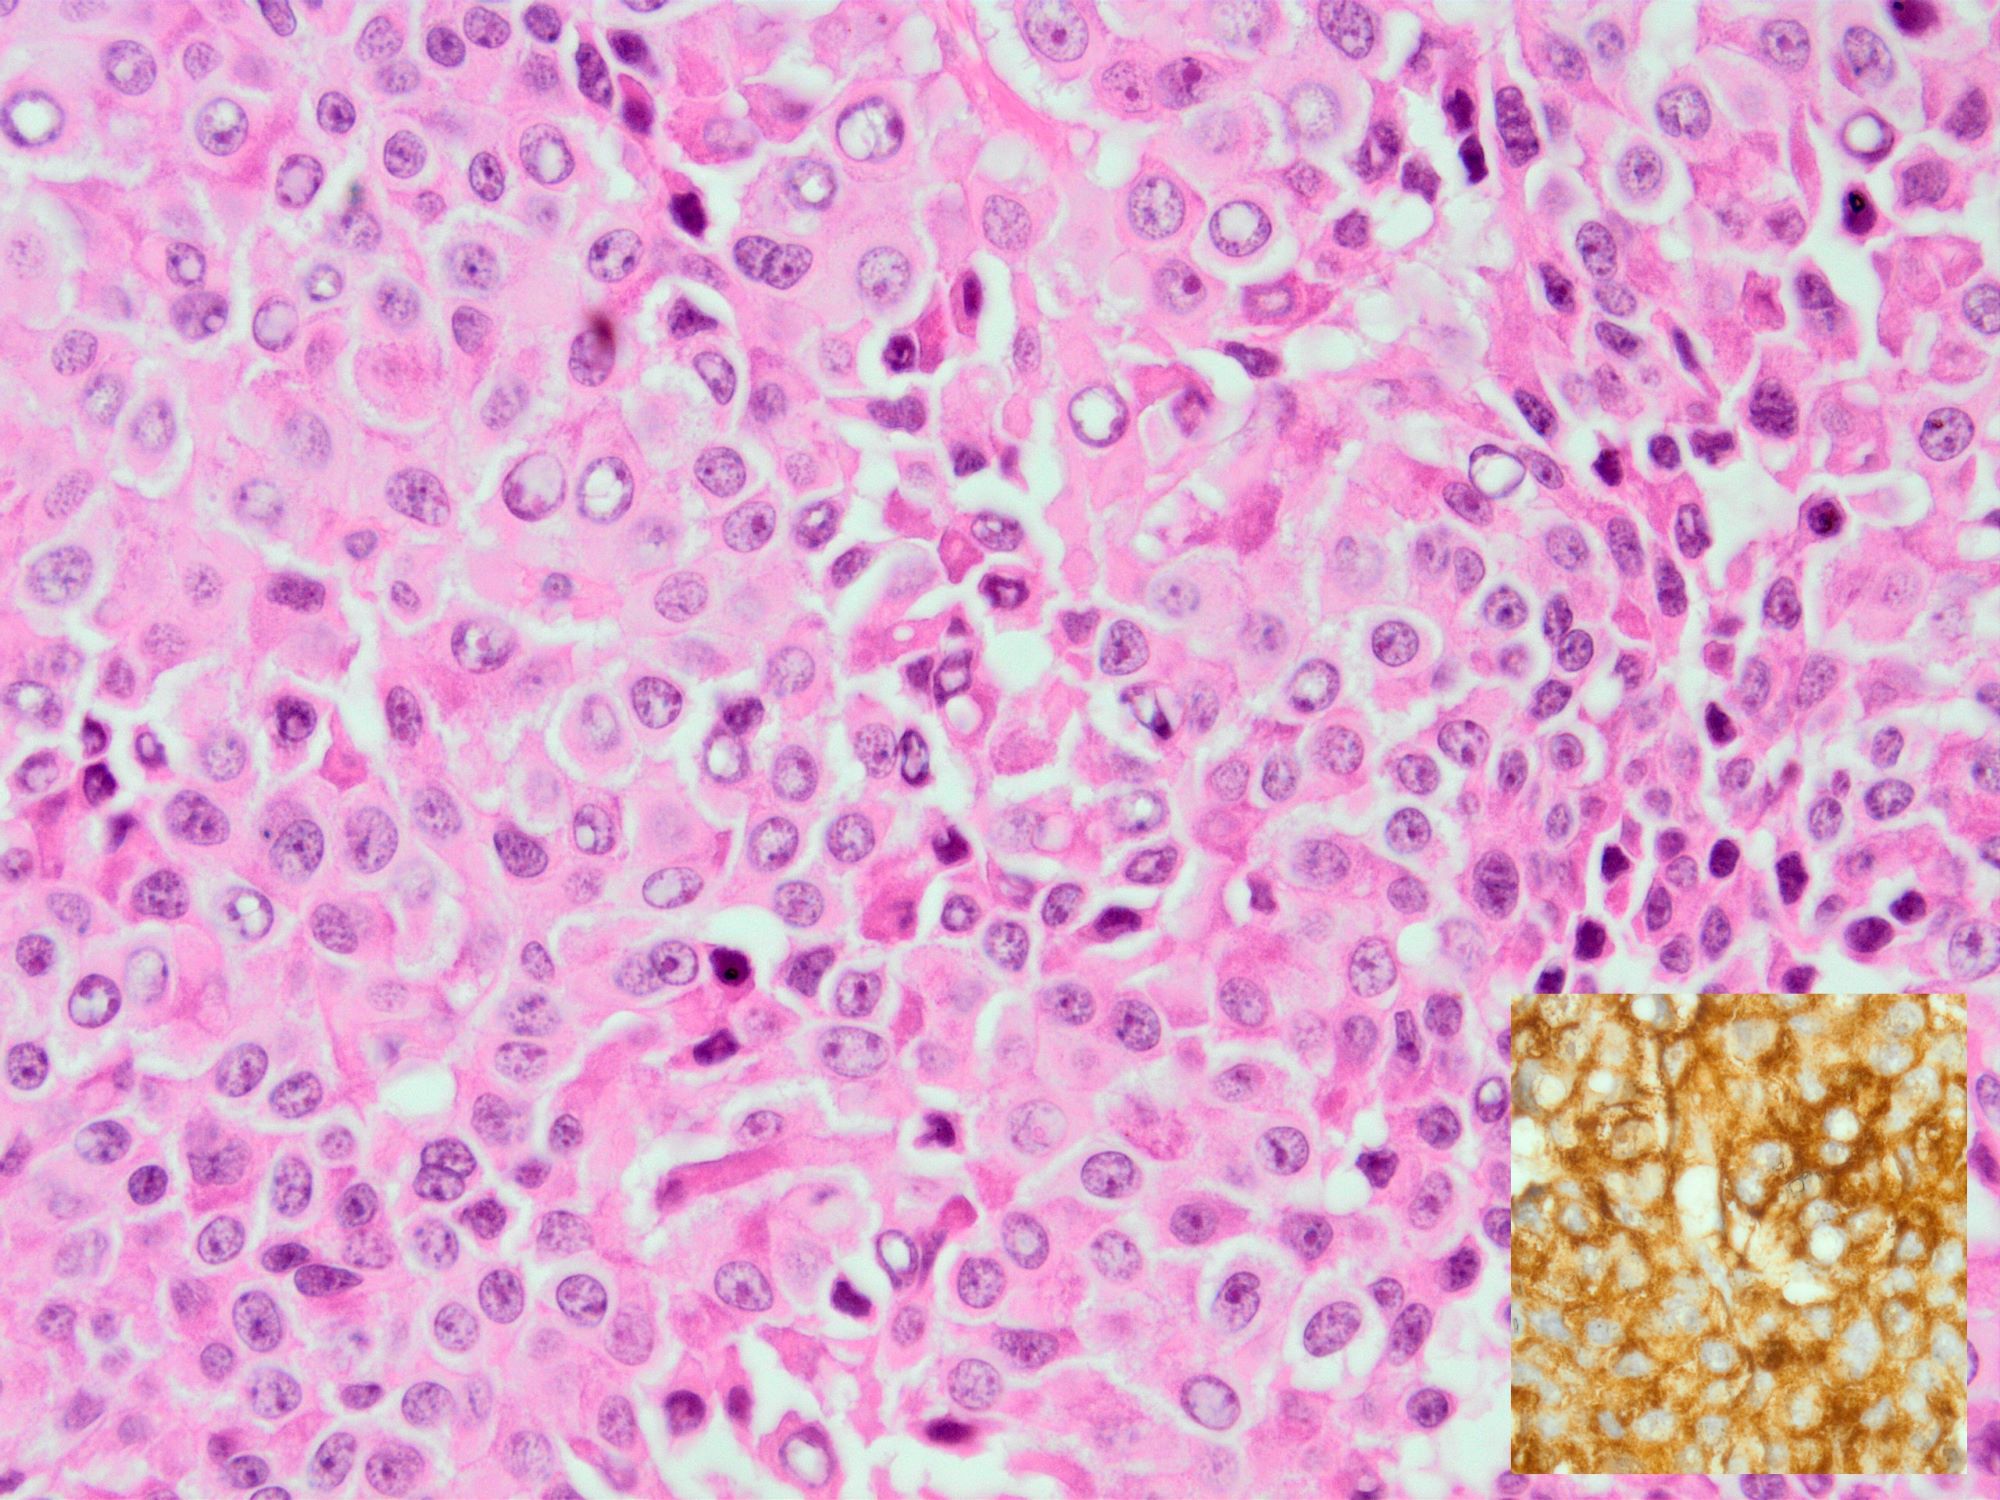 CAM 5.2 in Crooke cell adenoma